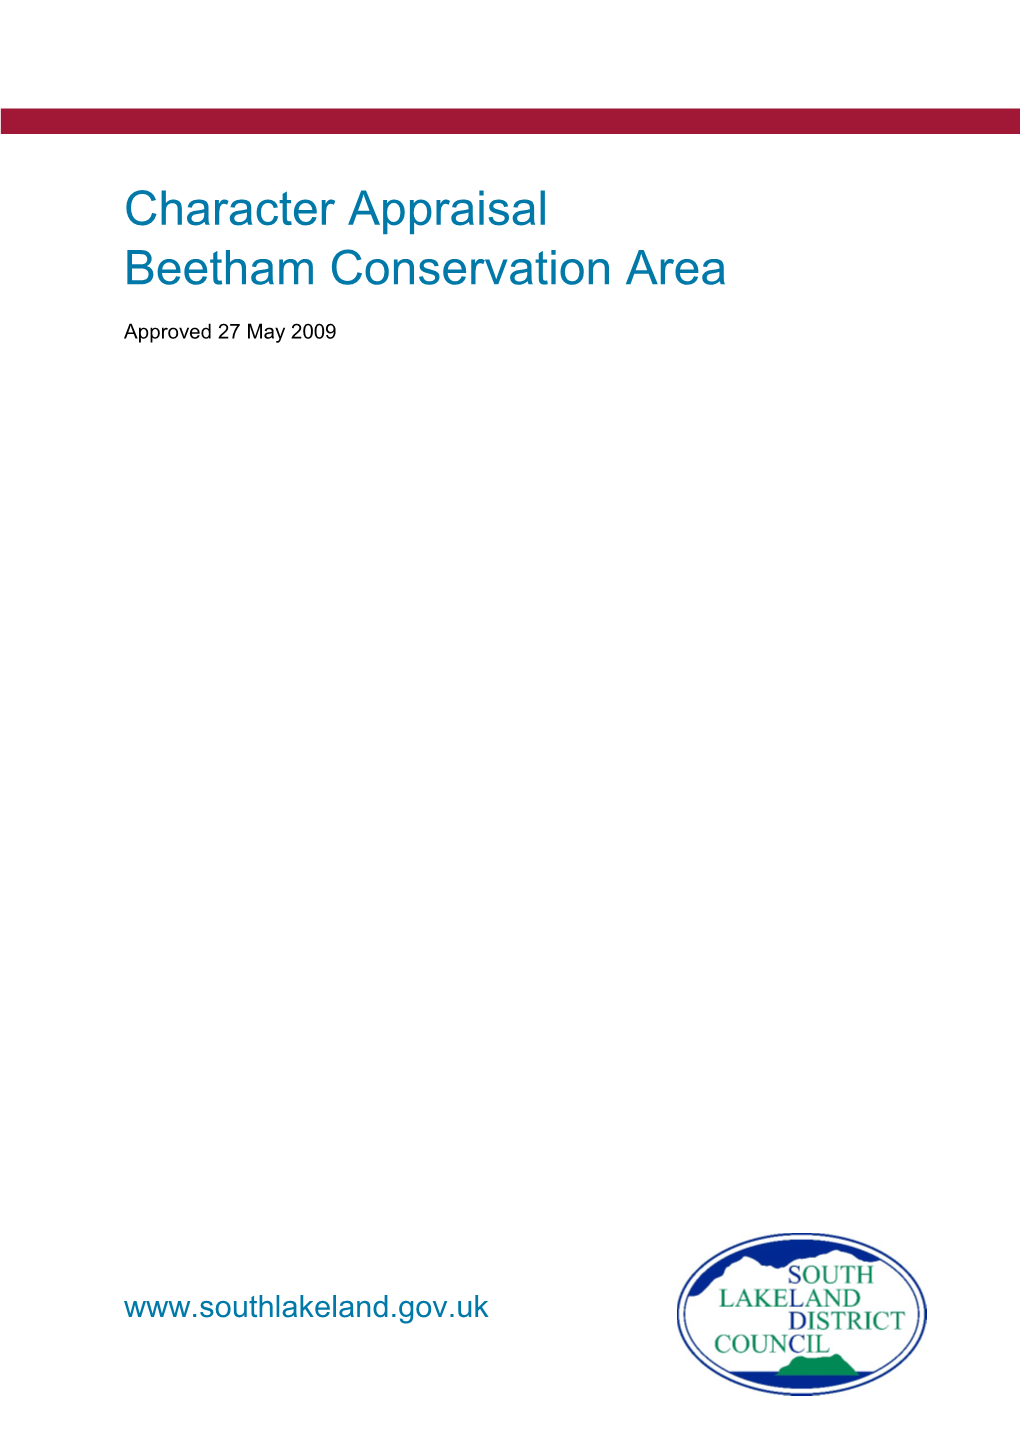 Beetham Conservation Area Character Appraisal